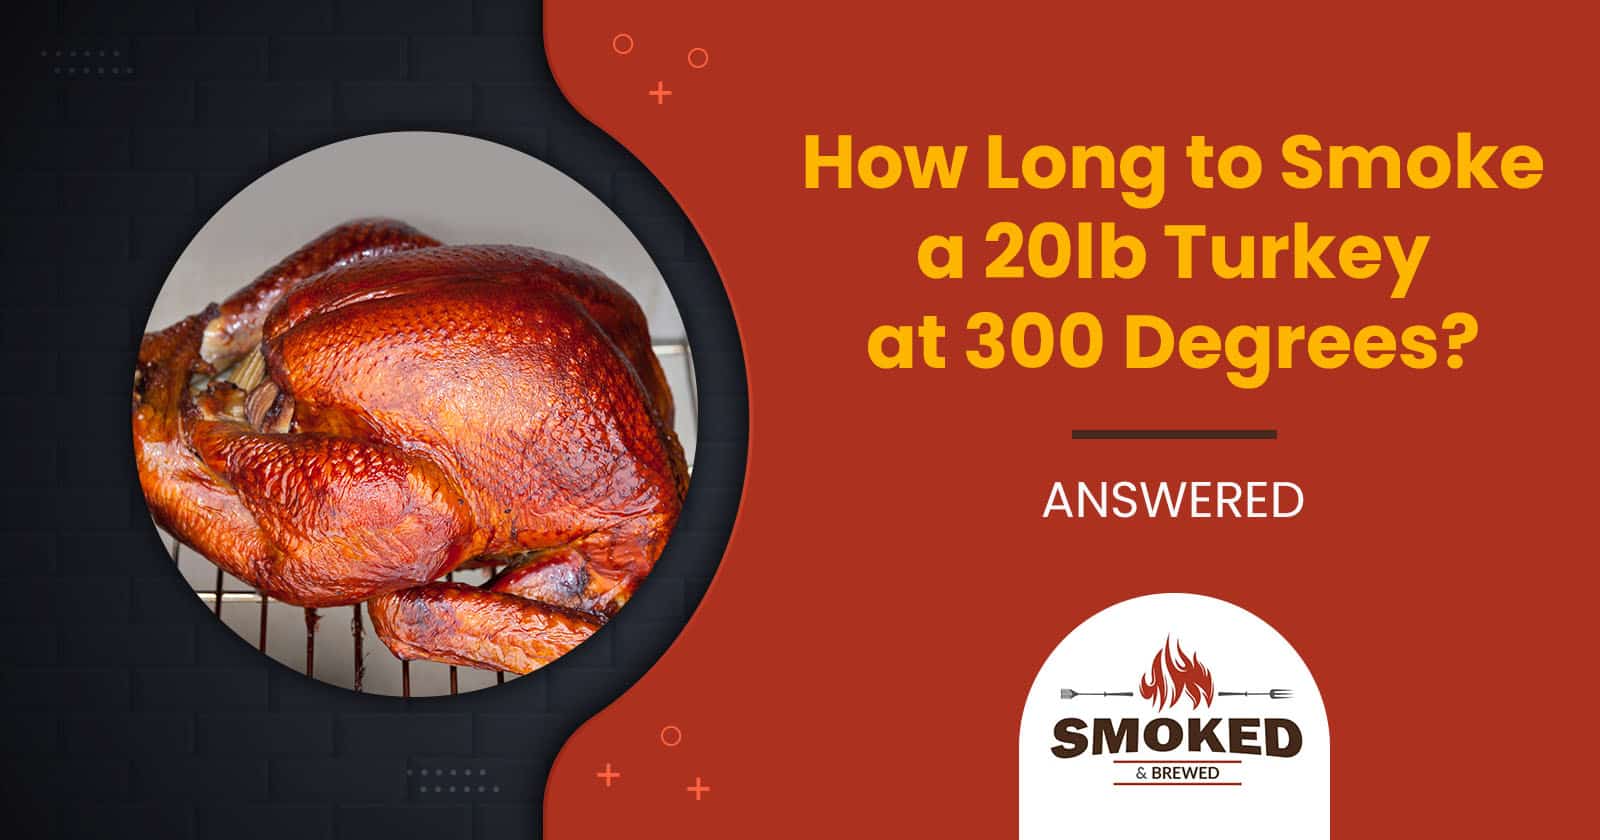 How Long to Smoke a 20lb Turkey at 300 Degrees? [ANSWERED]